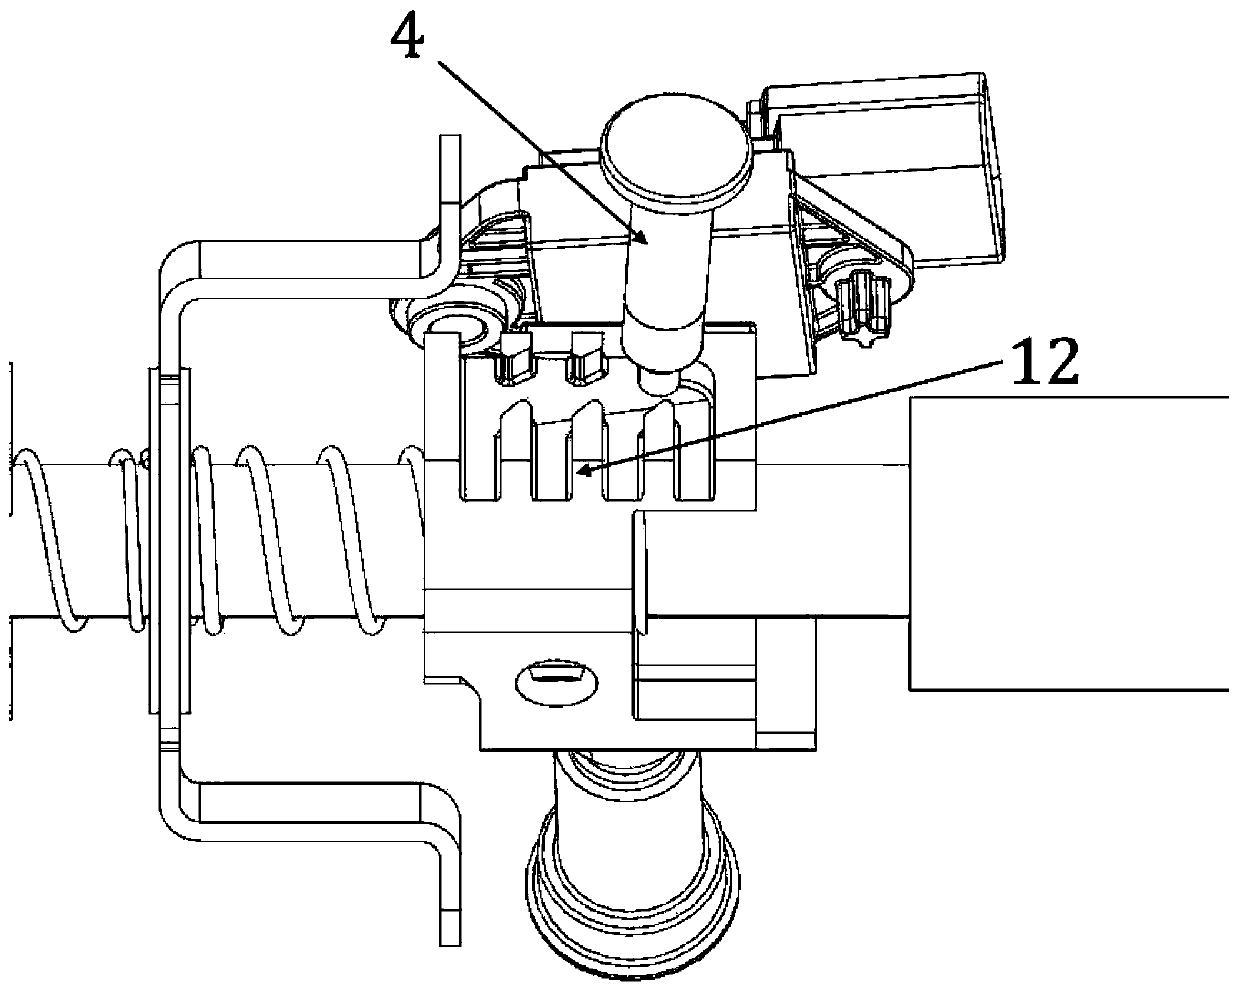 Transmission gear selecting and shifting control device driven by single motor